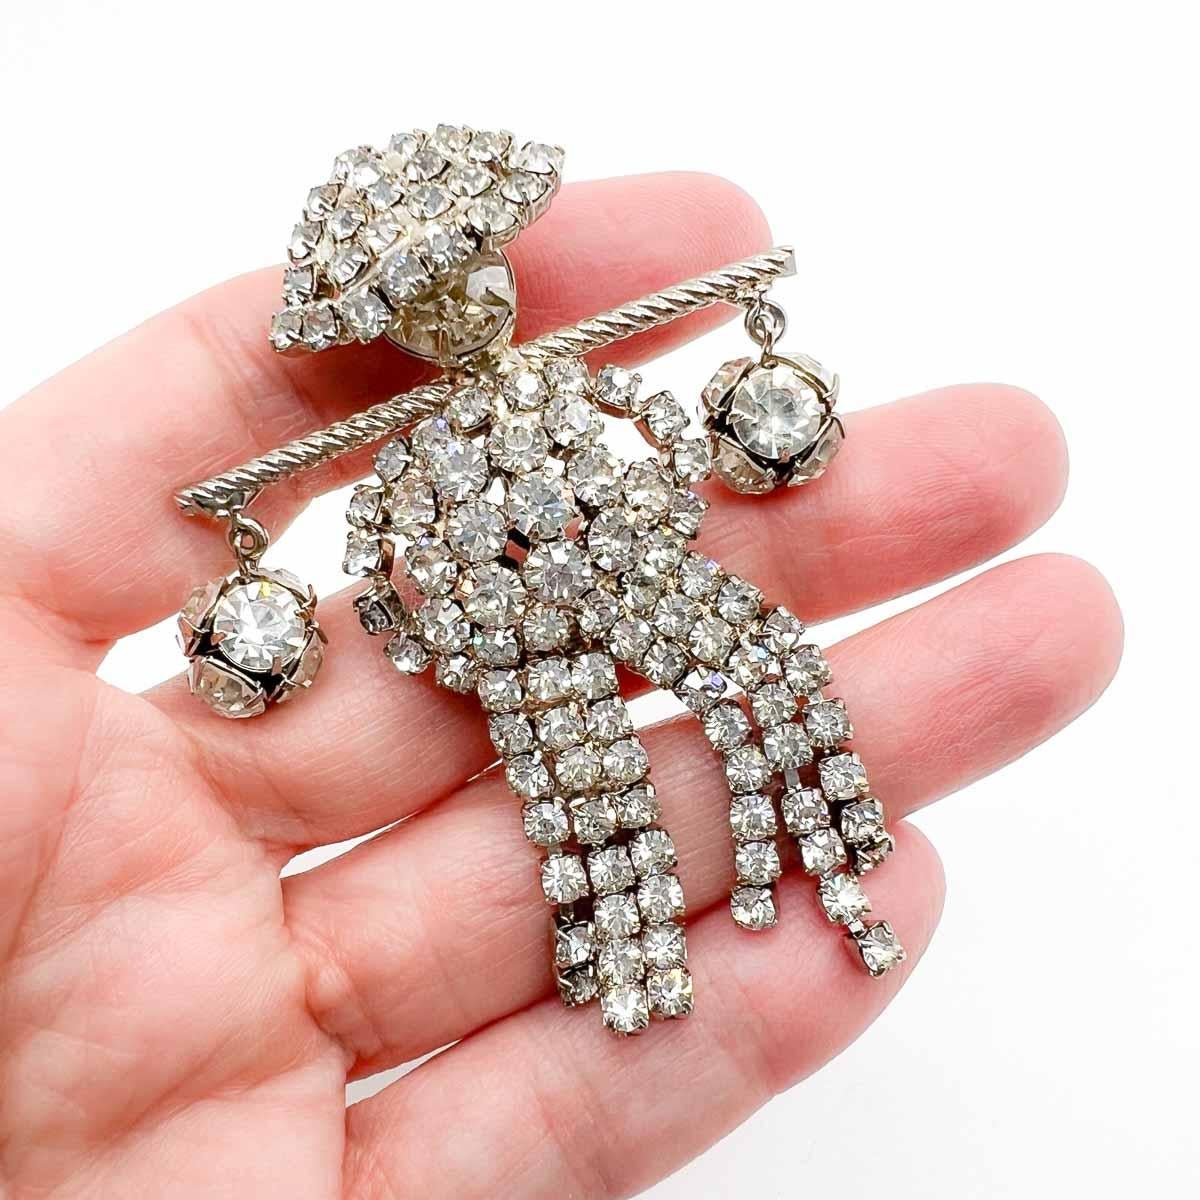 Vintage Pakula Figural Couple Brooches. A fabulous pair of figurals that will never fail to wow. Unique, ultra glam and still together after seventy years. Sounds like the perfect pair! 
The American jewellery makers Pakula originated in Chicago in